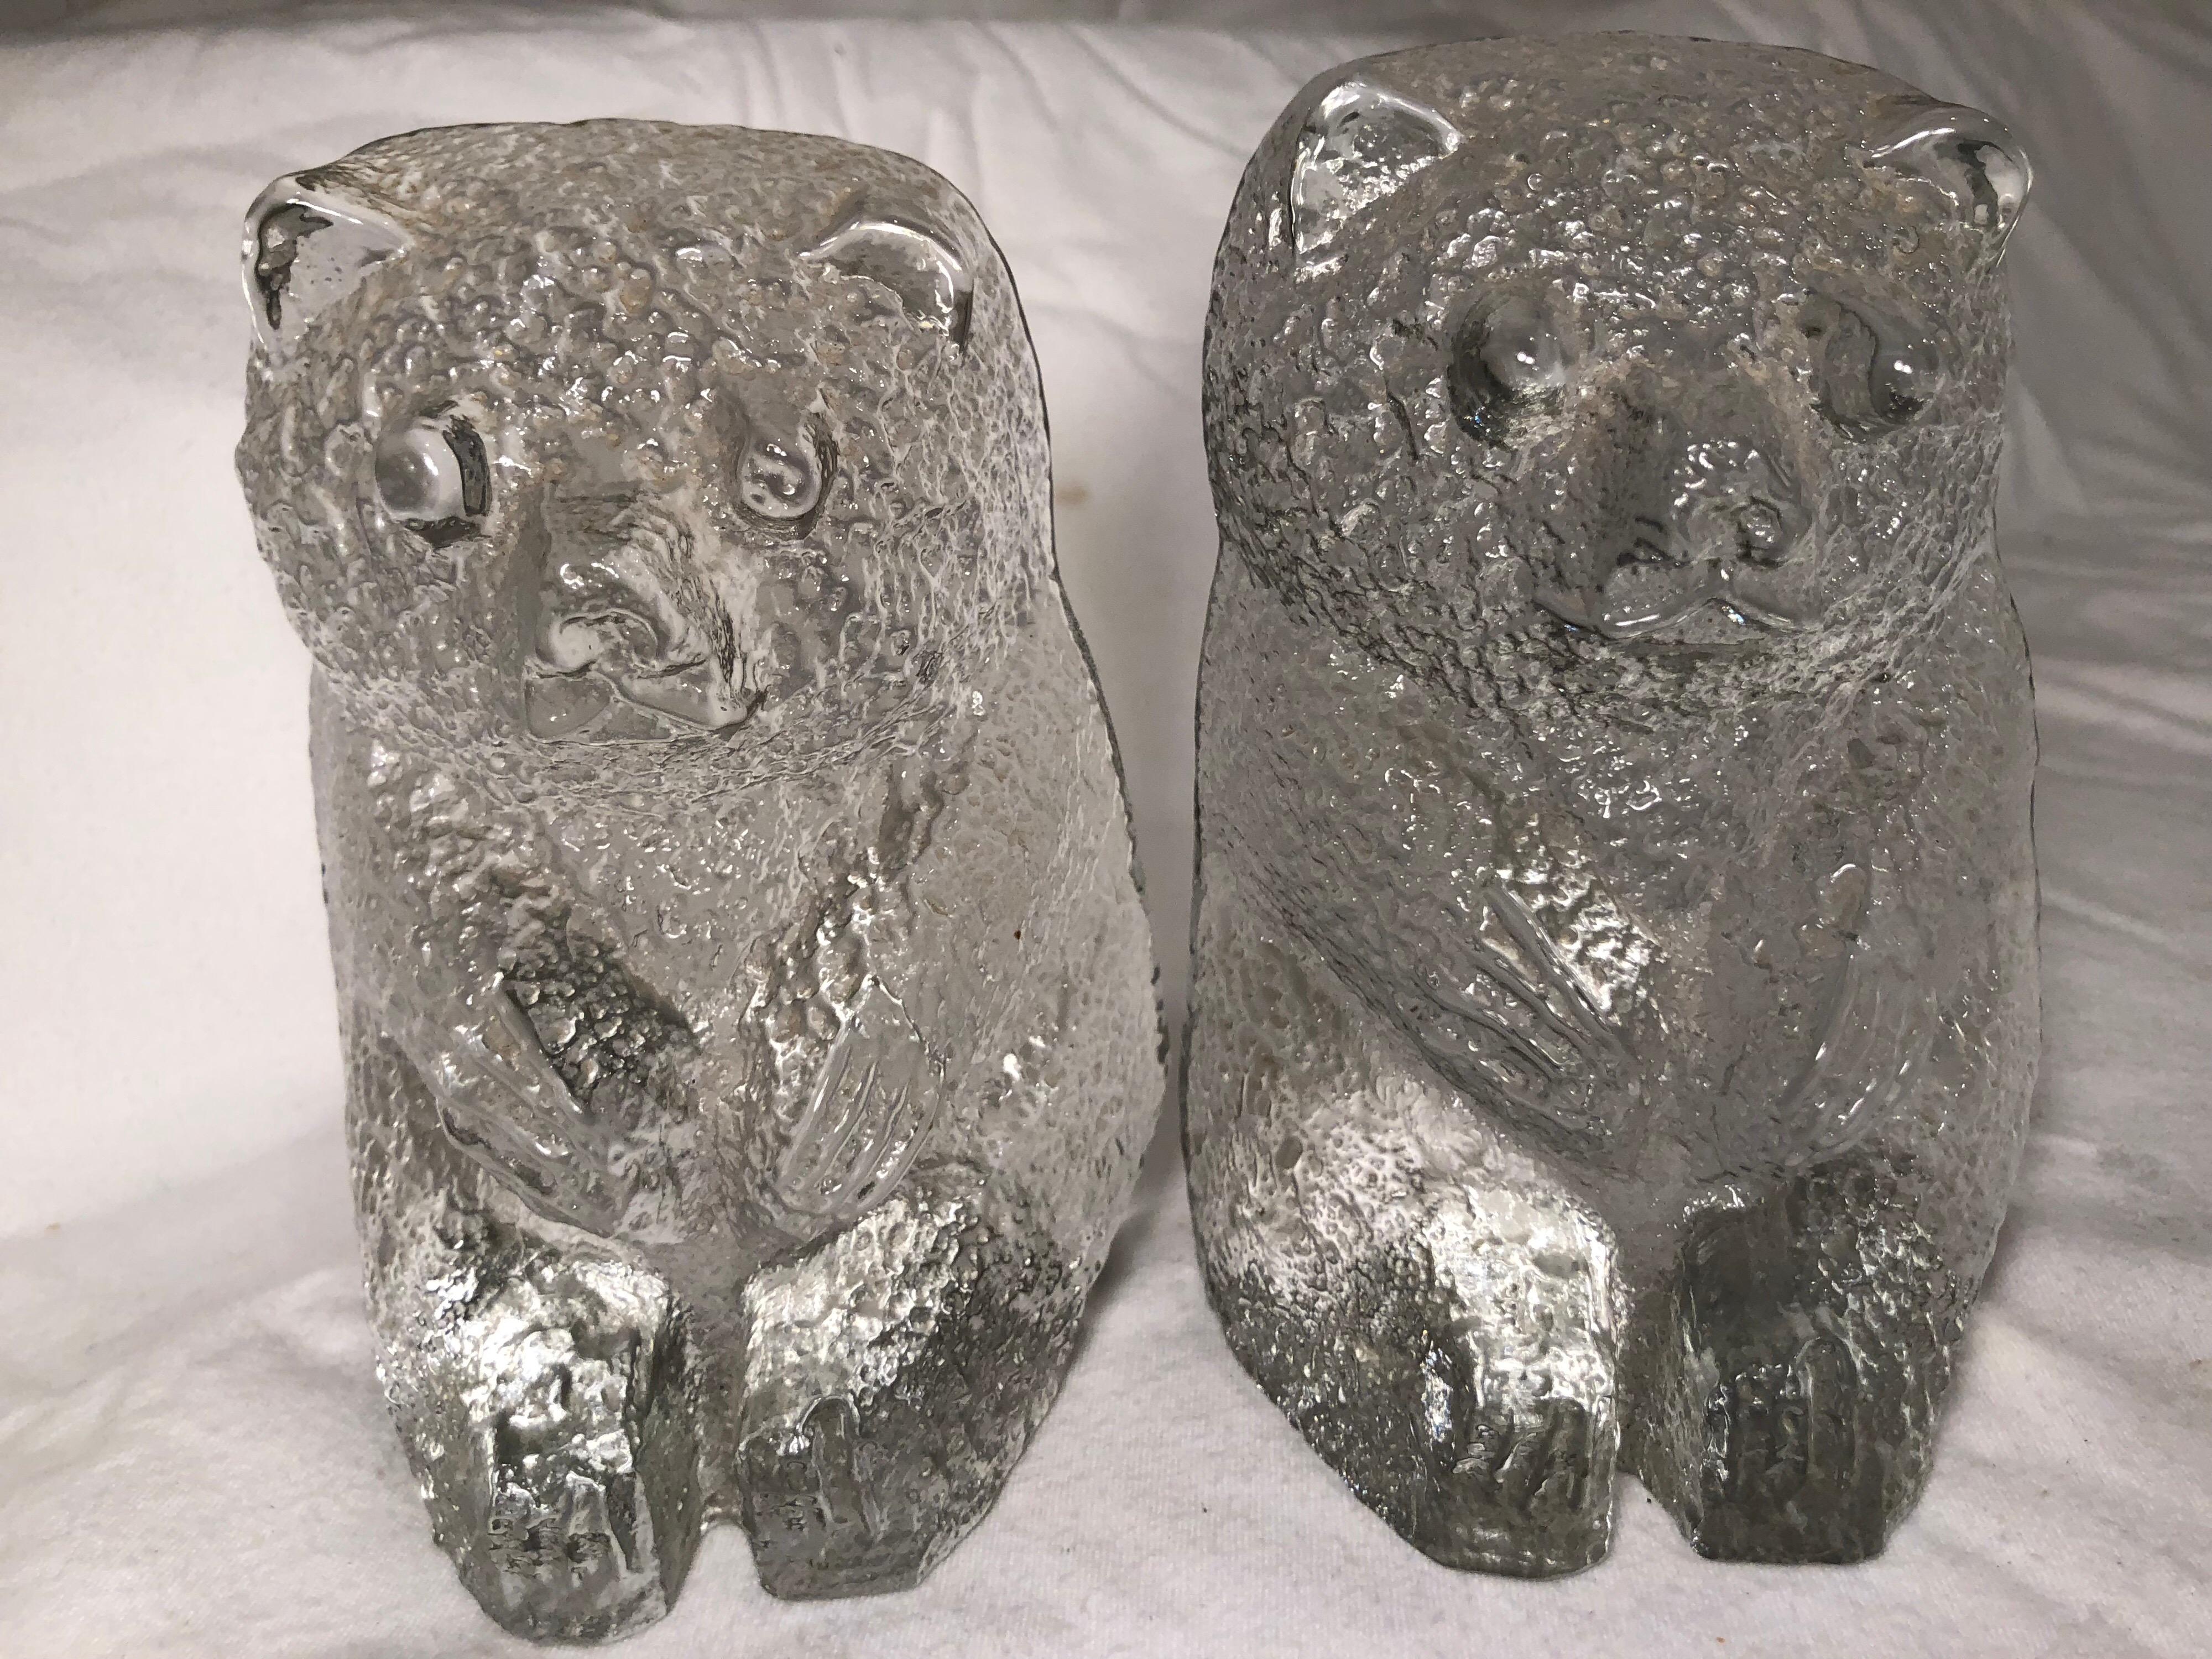 Pair of Blenko Glass Bear Bookends. Heavy molded clear glass in the shape of a bear. Fun for any kids room or Hunters office. These whimsical bookends can also be used flat as paperweights.